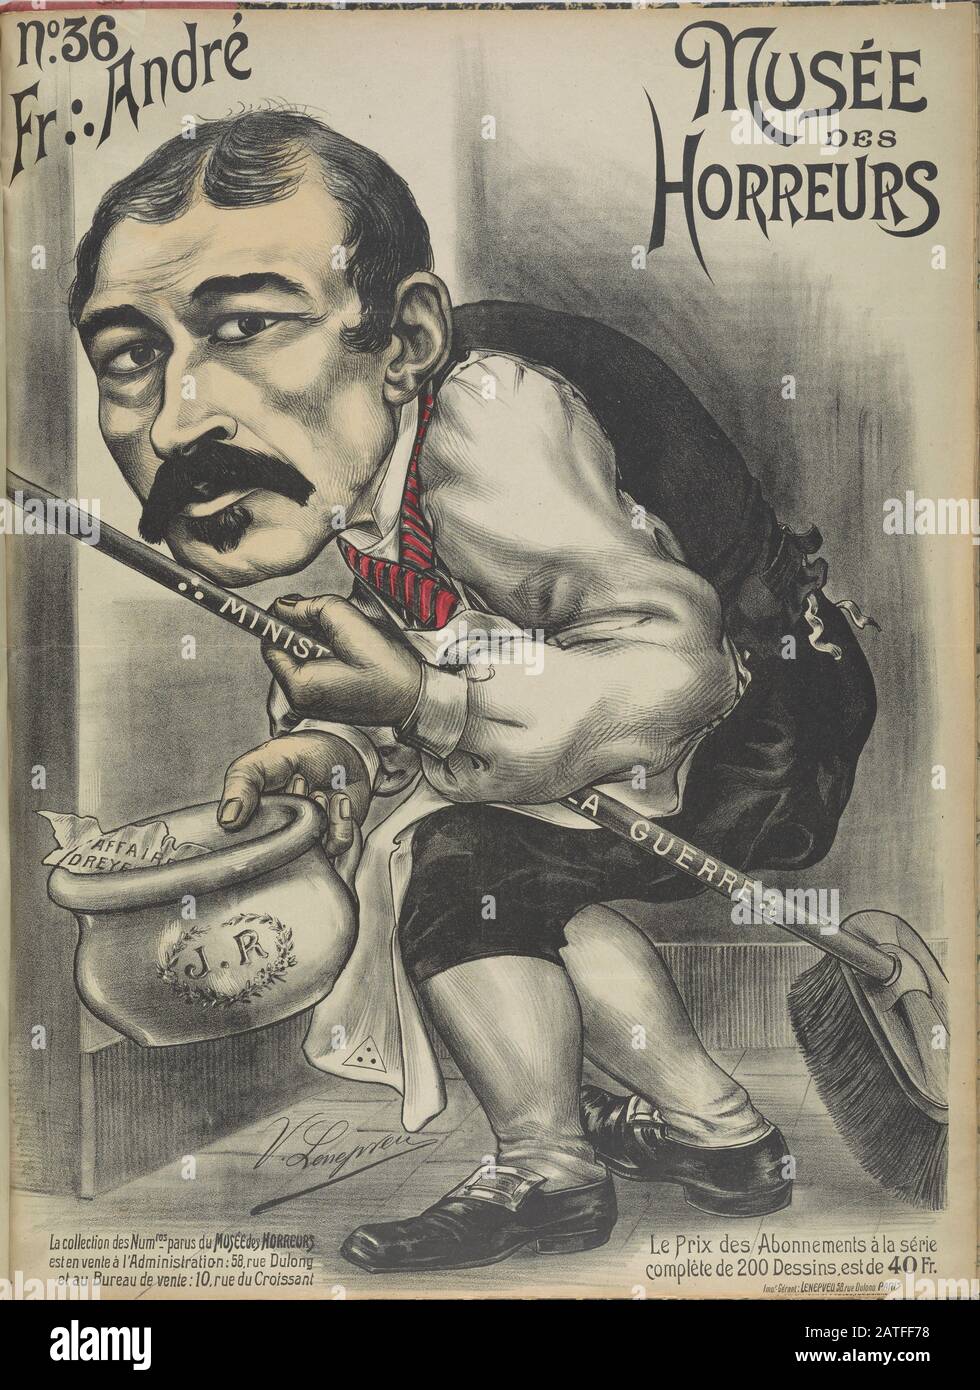 Musée des Horreurs -  No. 36 Fr. André  -  1900  -  Lenepveu, V.  -  Caricature of Louis-Joseph André (1838-1913) as a janitor carrying a broom and a chamber pot. André served as Minister of War from 1900 to 1904 during the Dreyfus Affair. Hand colored. Stock Photo